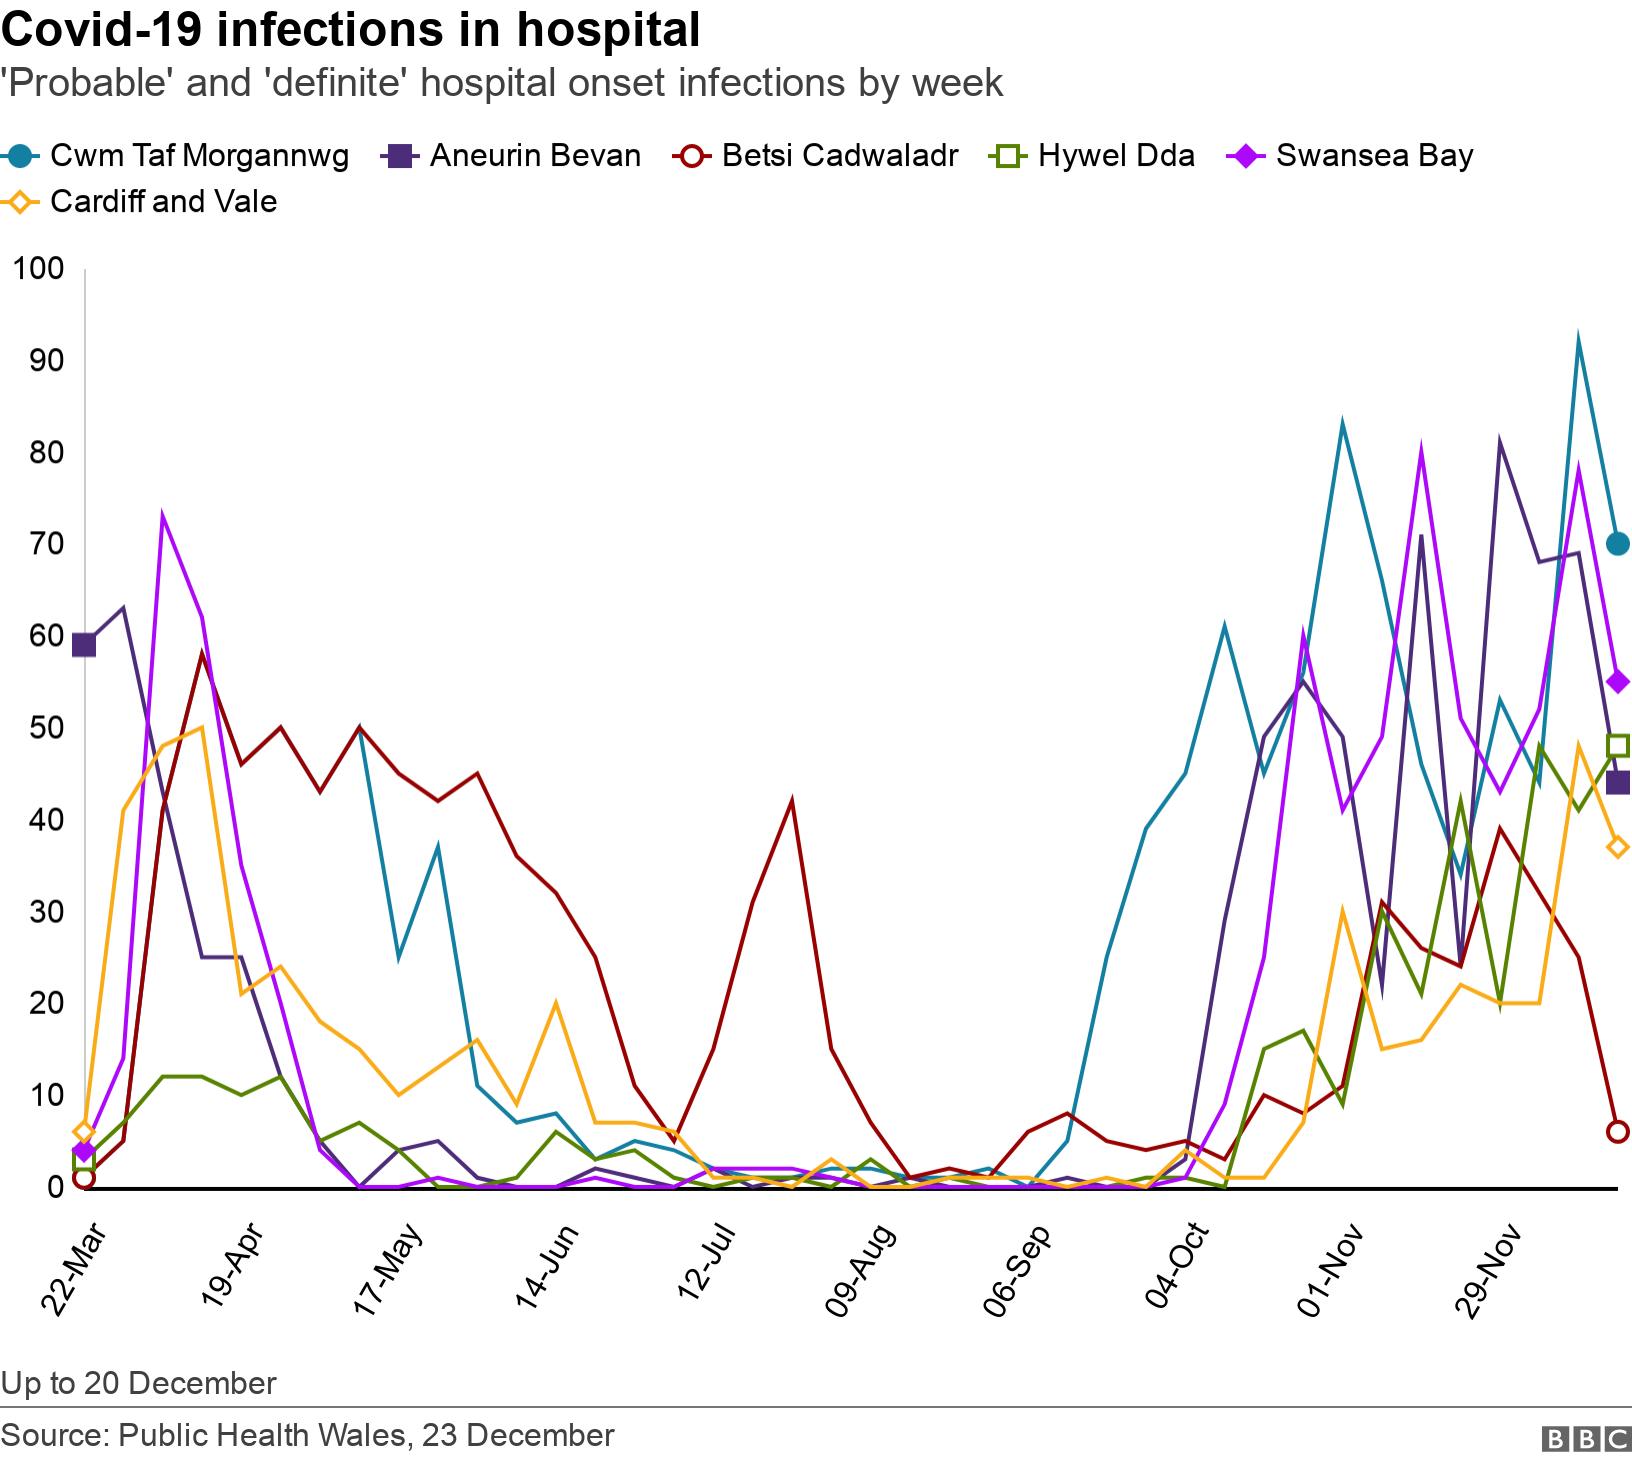 Covid-19 infections in hospital. &#39;Probable&#39; and &#39;definite&#39; hospital onset infections by week. Up to 20 December.